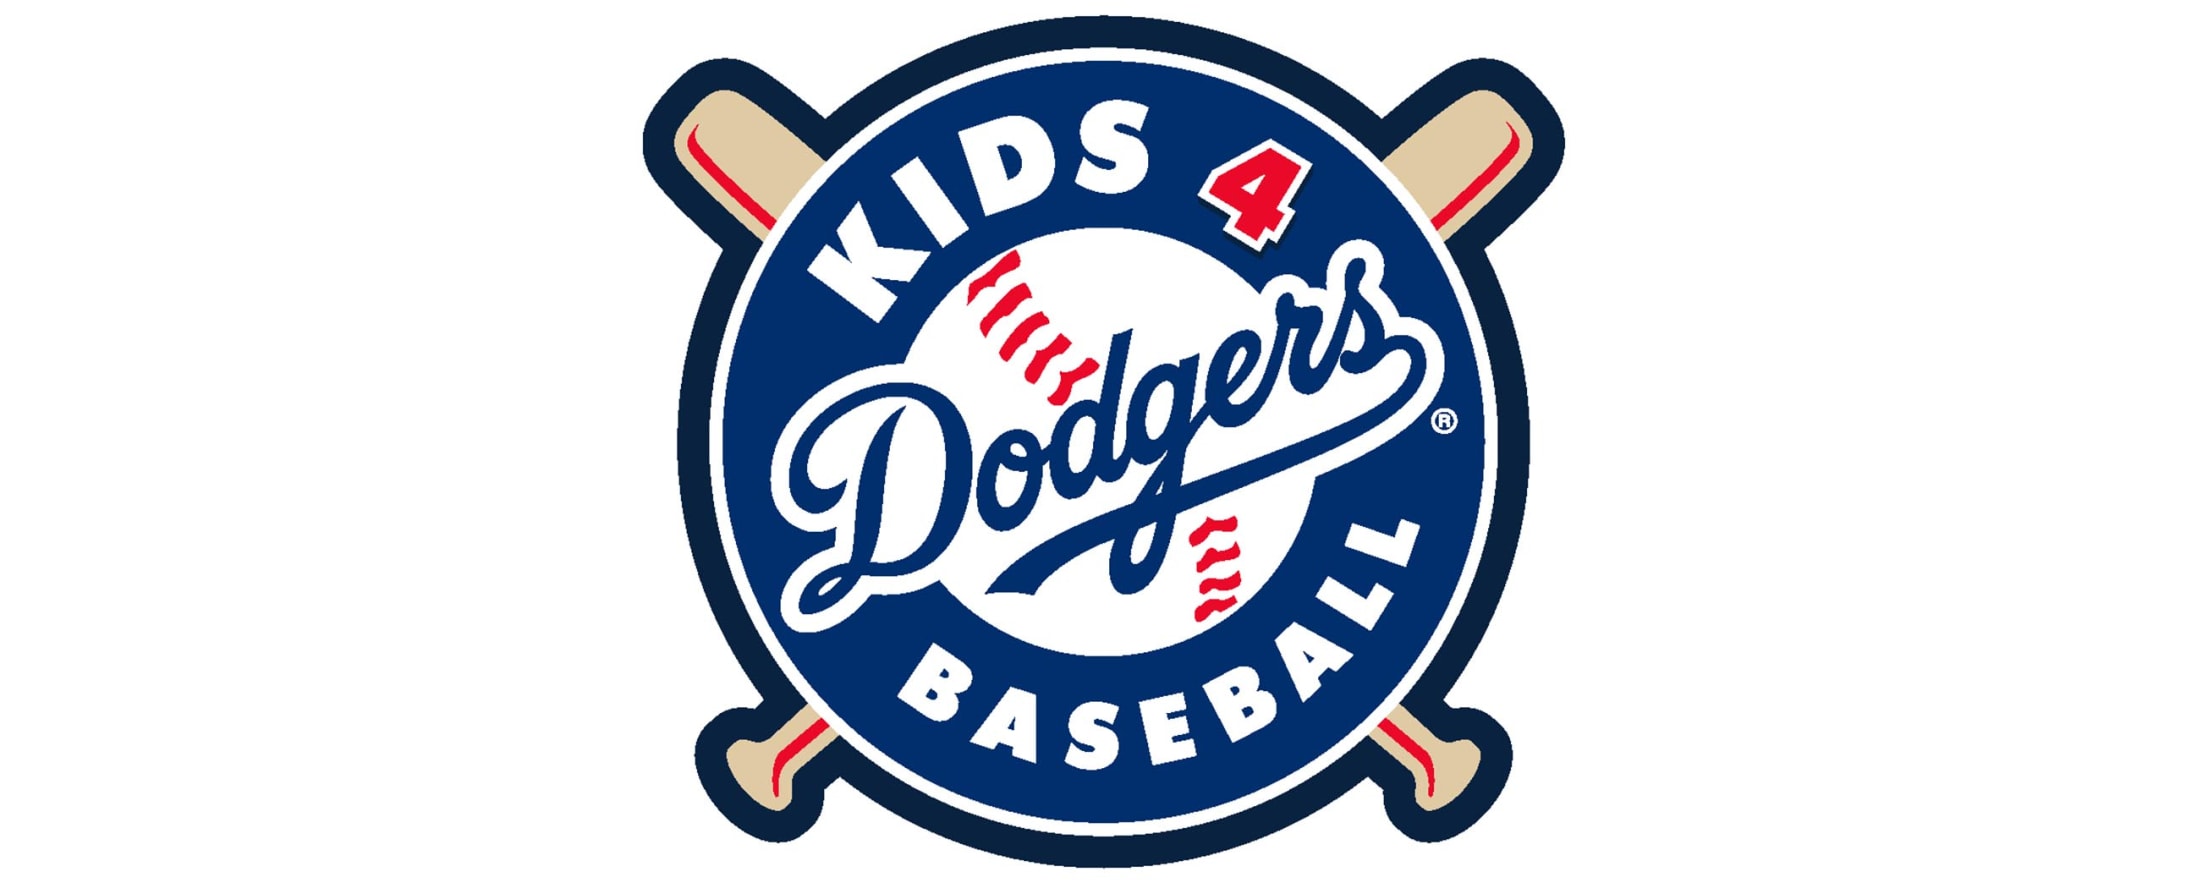 dodgers youth